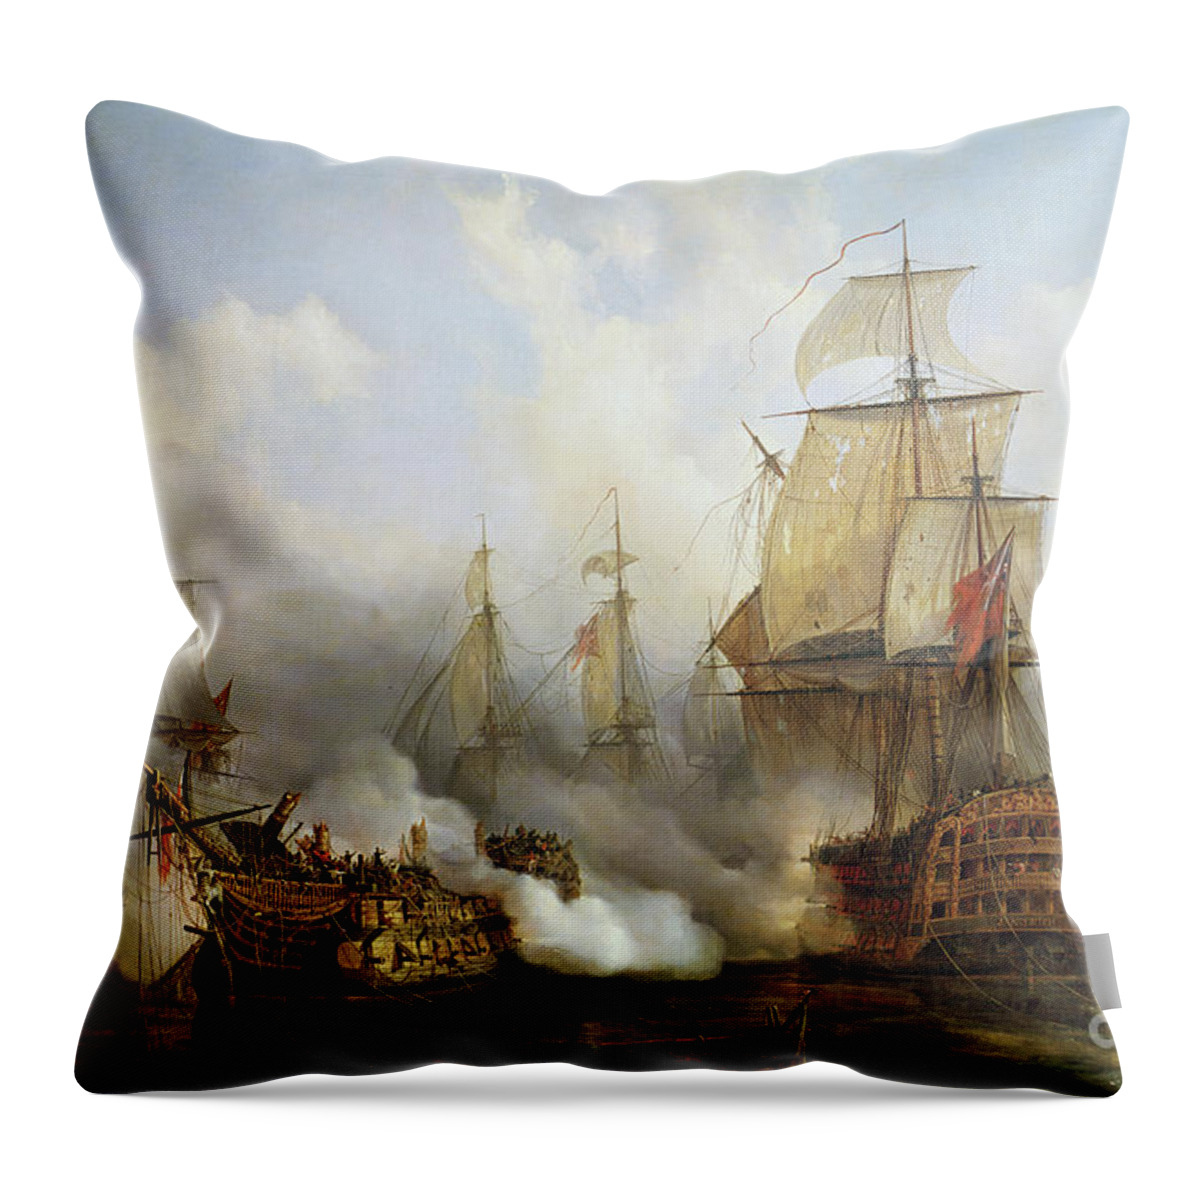 The Throw Pillow featuring the painting Unknown title Sea Battle by Auguste Etienne Francois Mayer